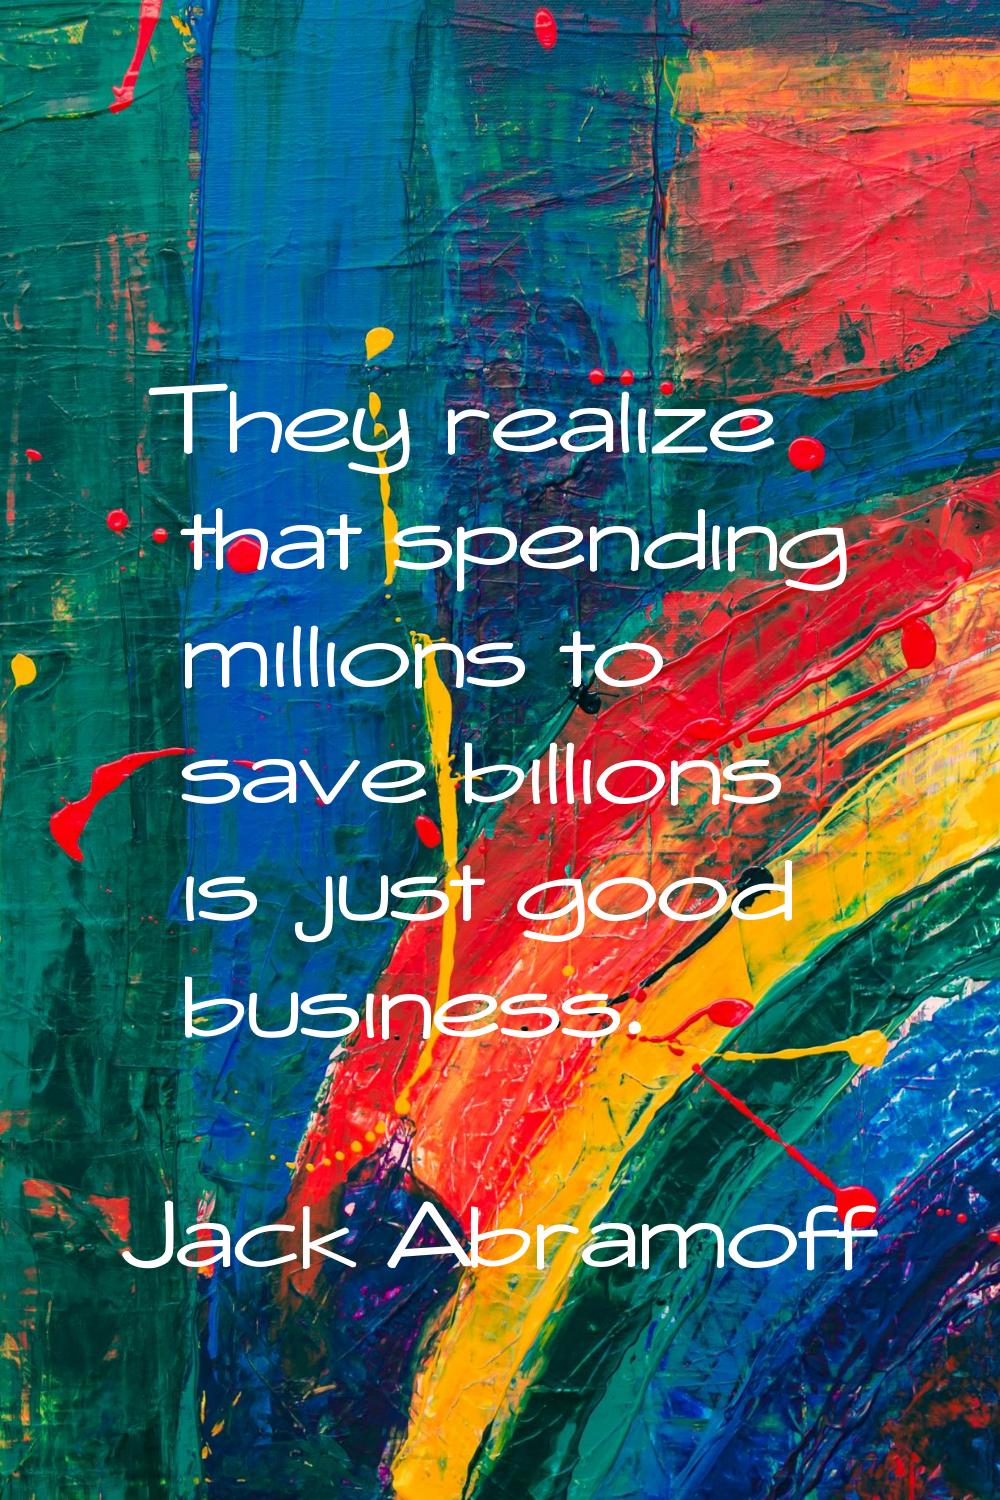 They realize that spending millions to save billions is just good business.